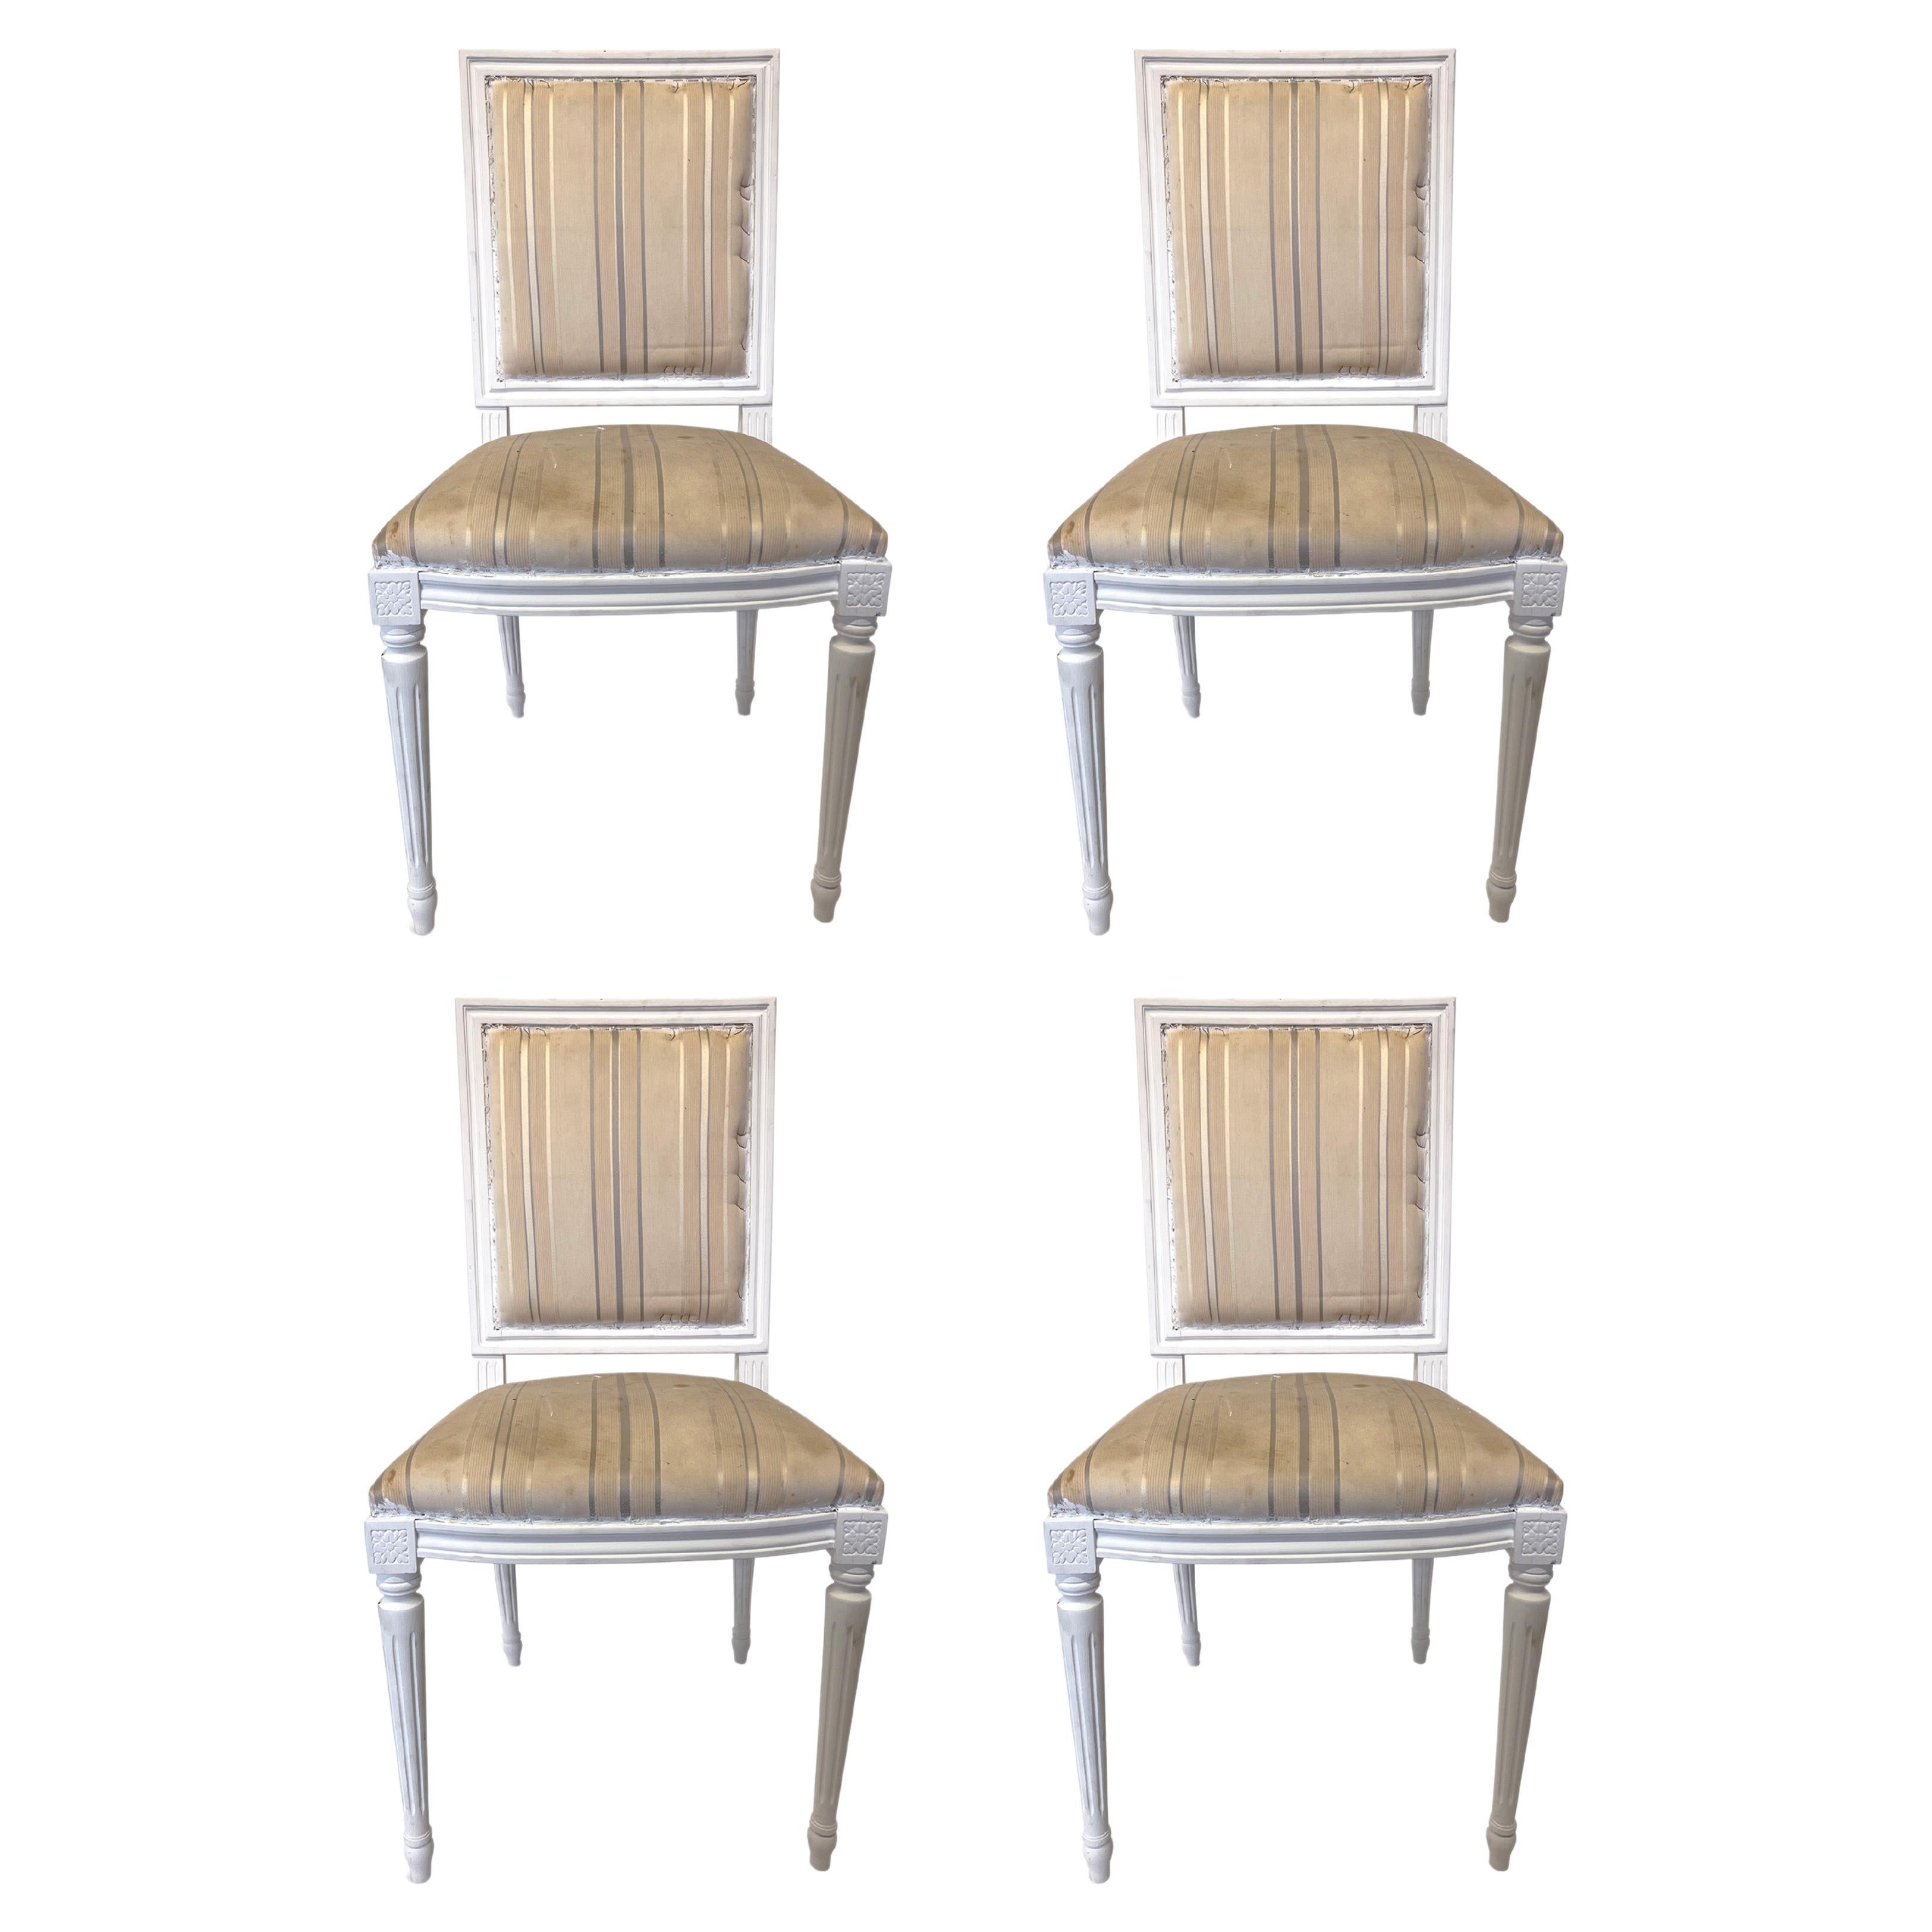 Set of 4 French Louis XVI Style Chairs with Upholstered Square Backrests